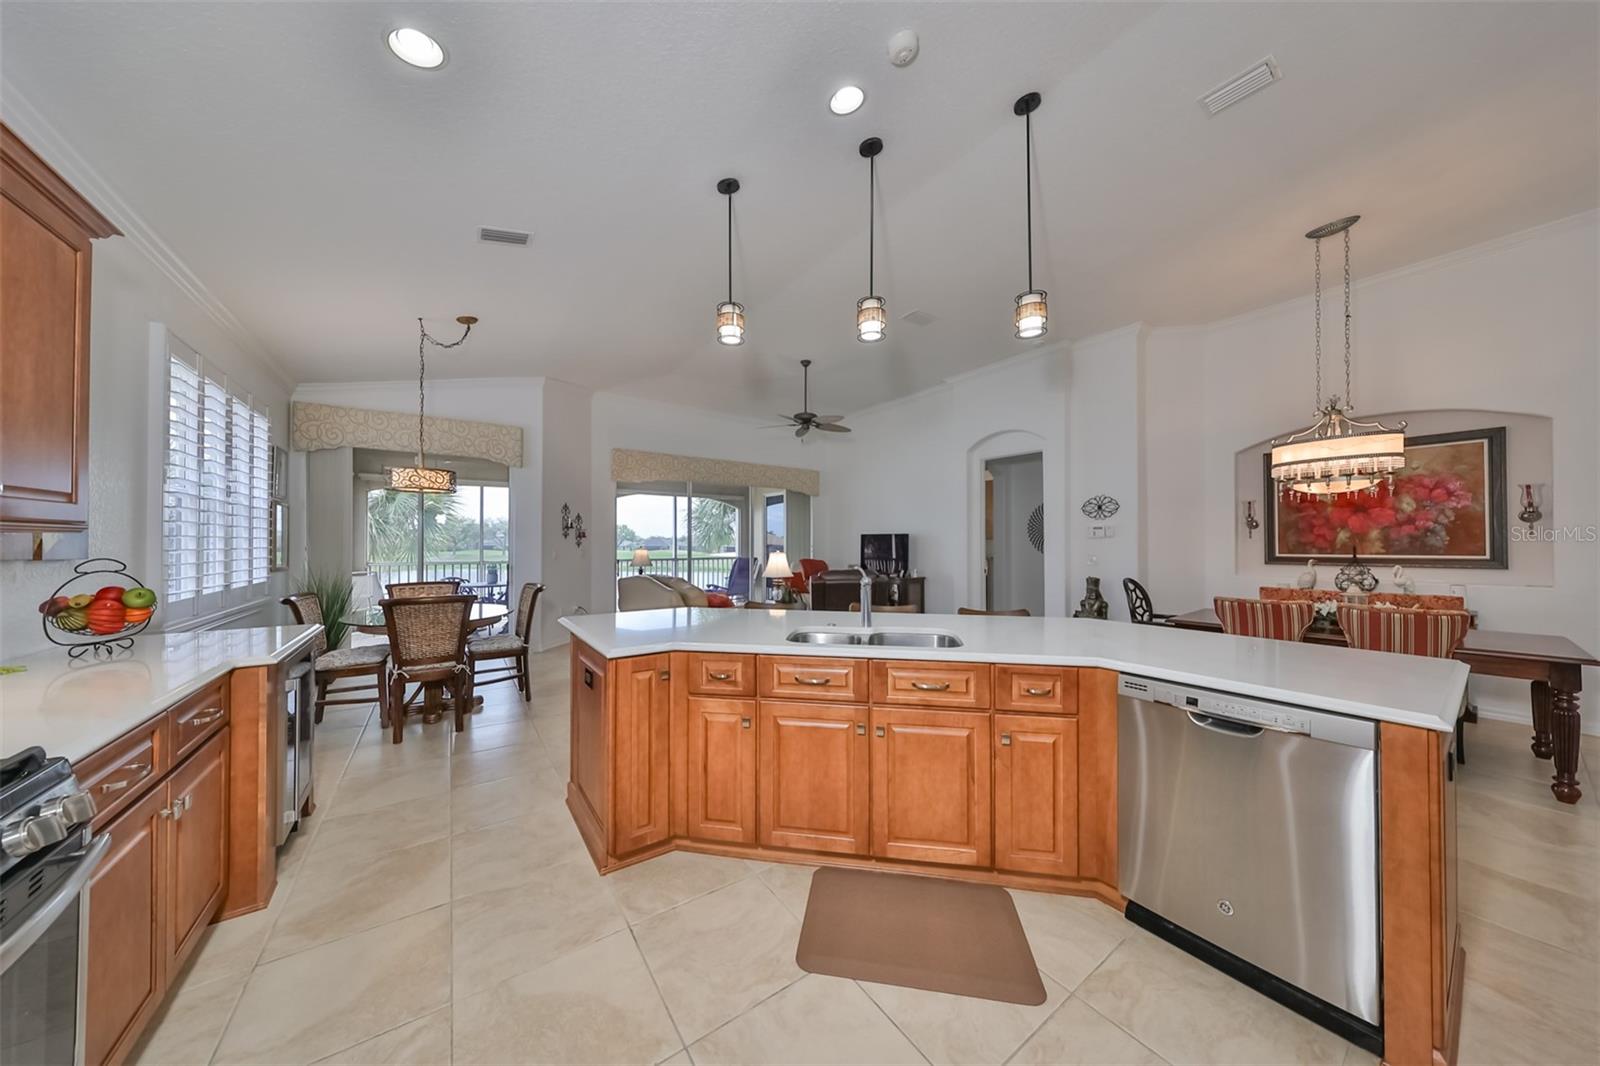 This well appointed kitchen accommodates multiple cooks. Recessed lighting, custom pendants, mass surface areas and high end appliances make task in this bright and open space enjoyable.